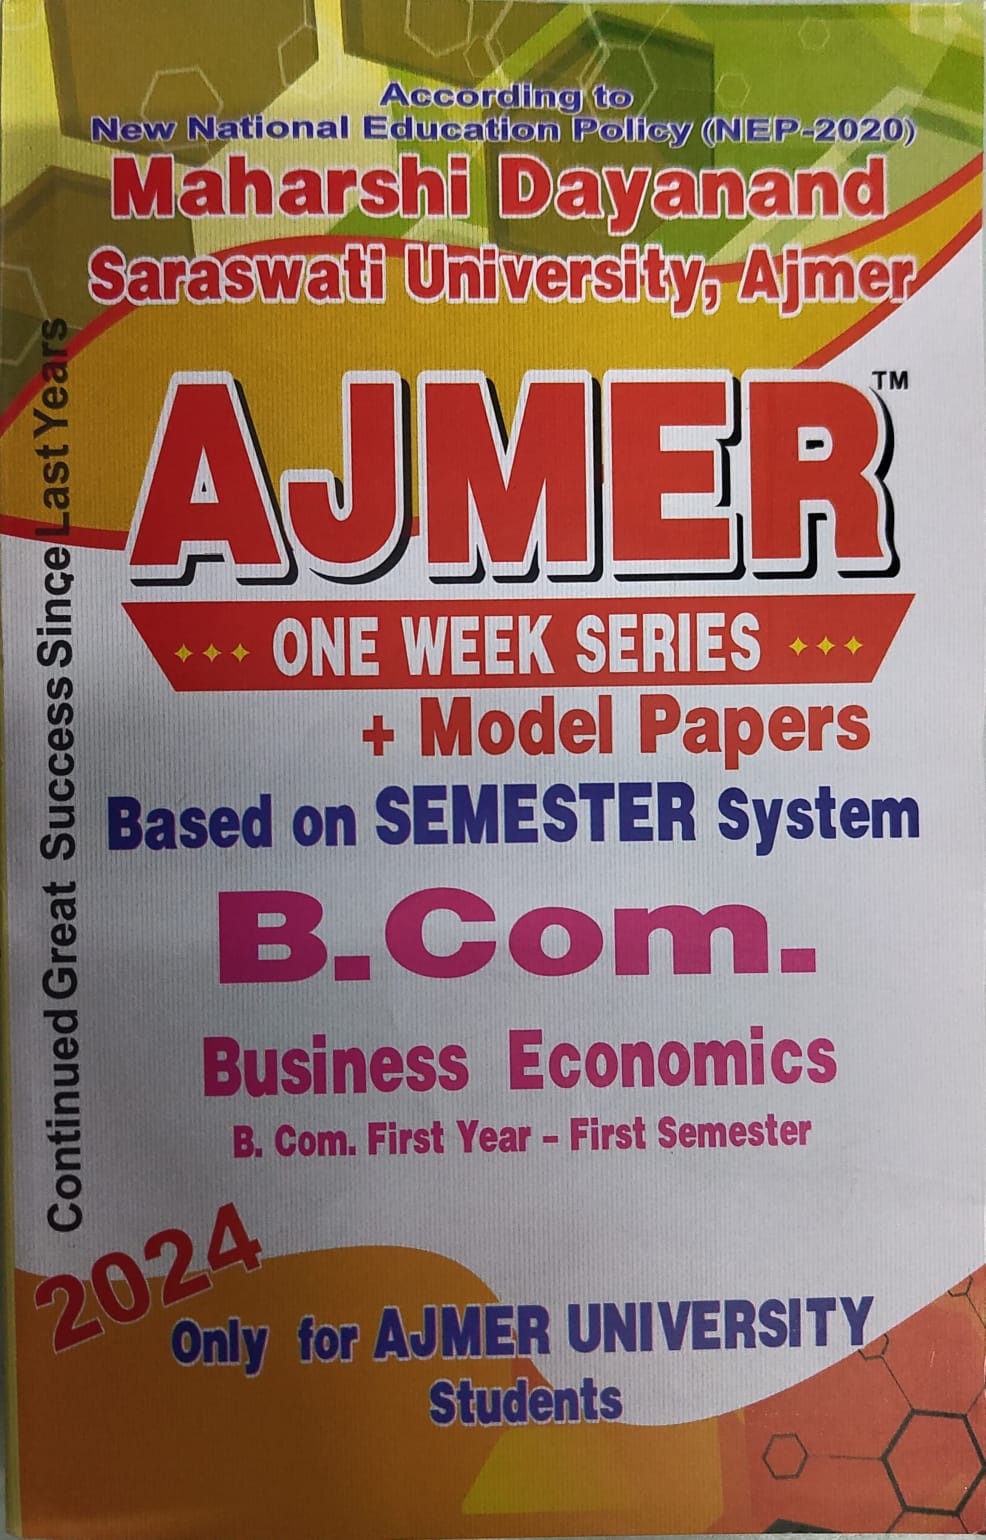 According to New National Education Policy (NEP-2020) Maharshi Dayanand Saraswati University, Ajmer AJMER ONE WEEK SERIES Model Papers Based on SEMESTER System B.Com. - Business Economics B. Com. First Year - First Semester  Only for AJMER UNIVERSITY Students